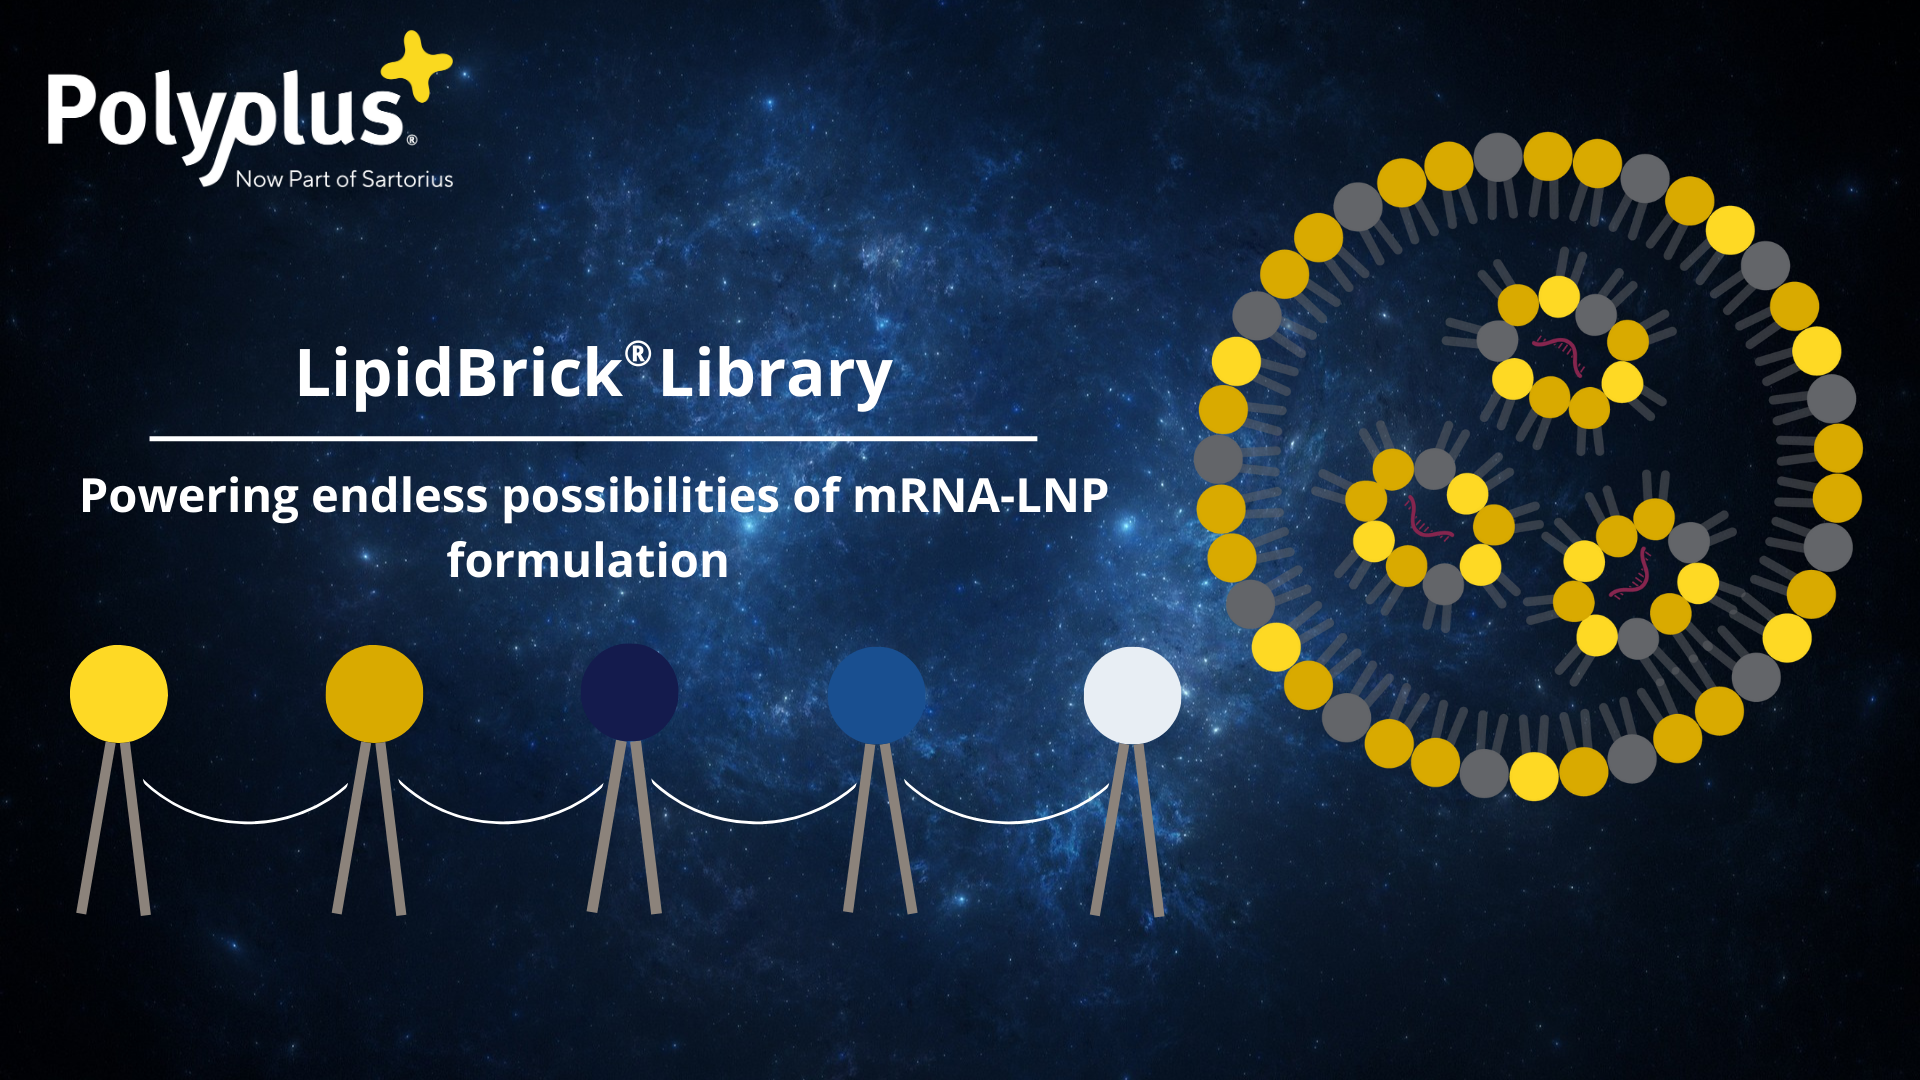 Polyplus Expands LipidBrick® Library to Optimize LNP Formulation for mRNA Therapeutics